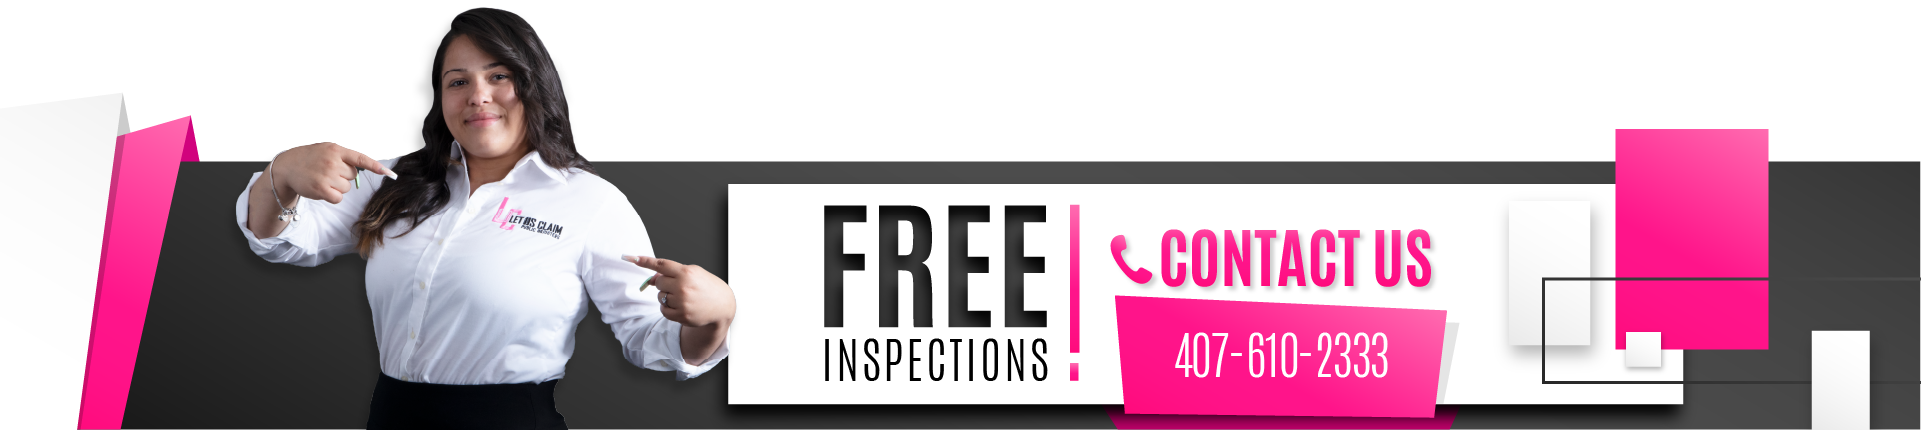 Free inspection